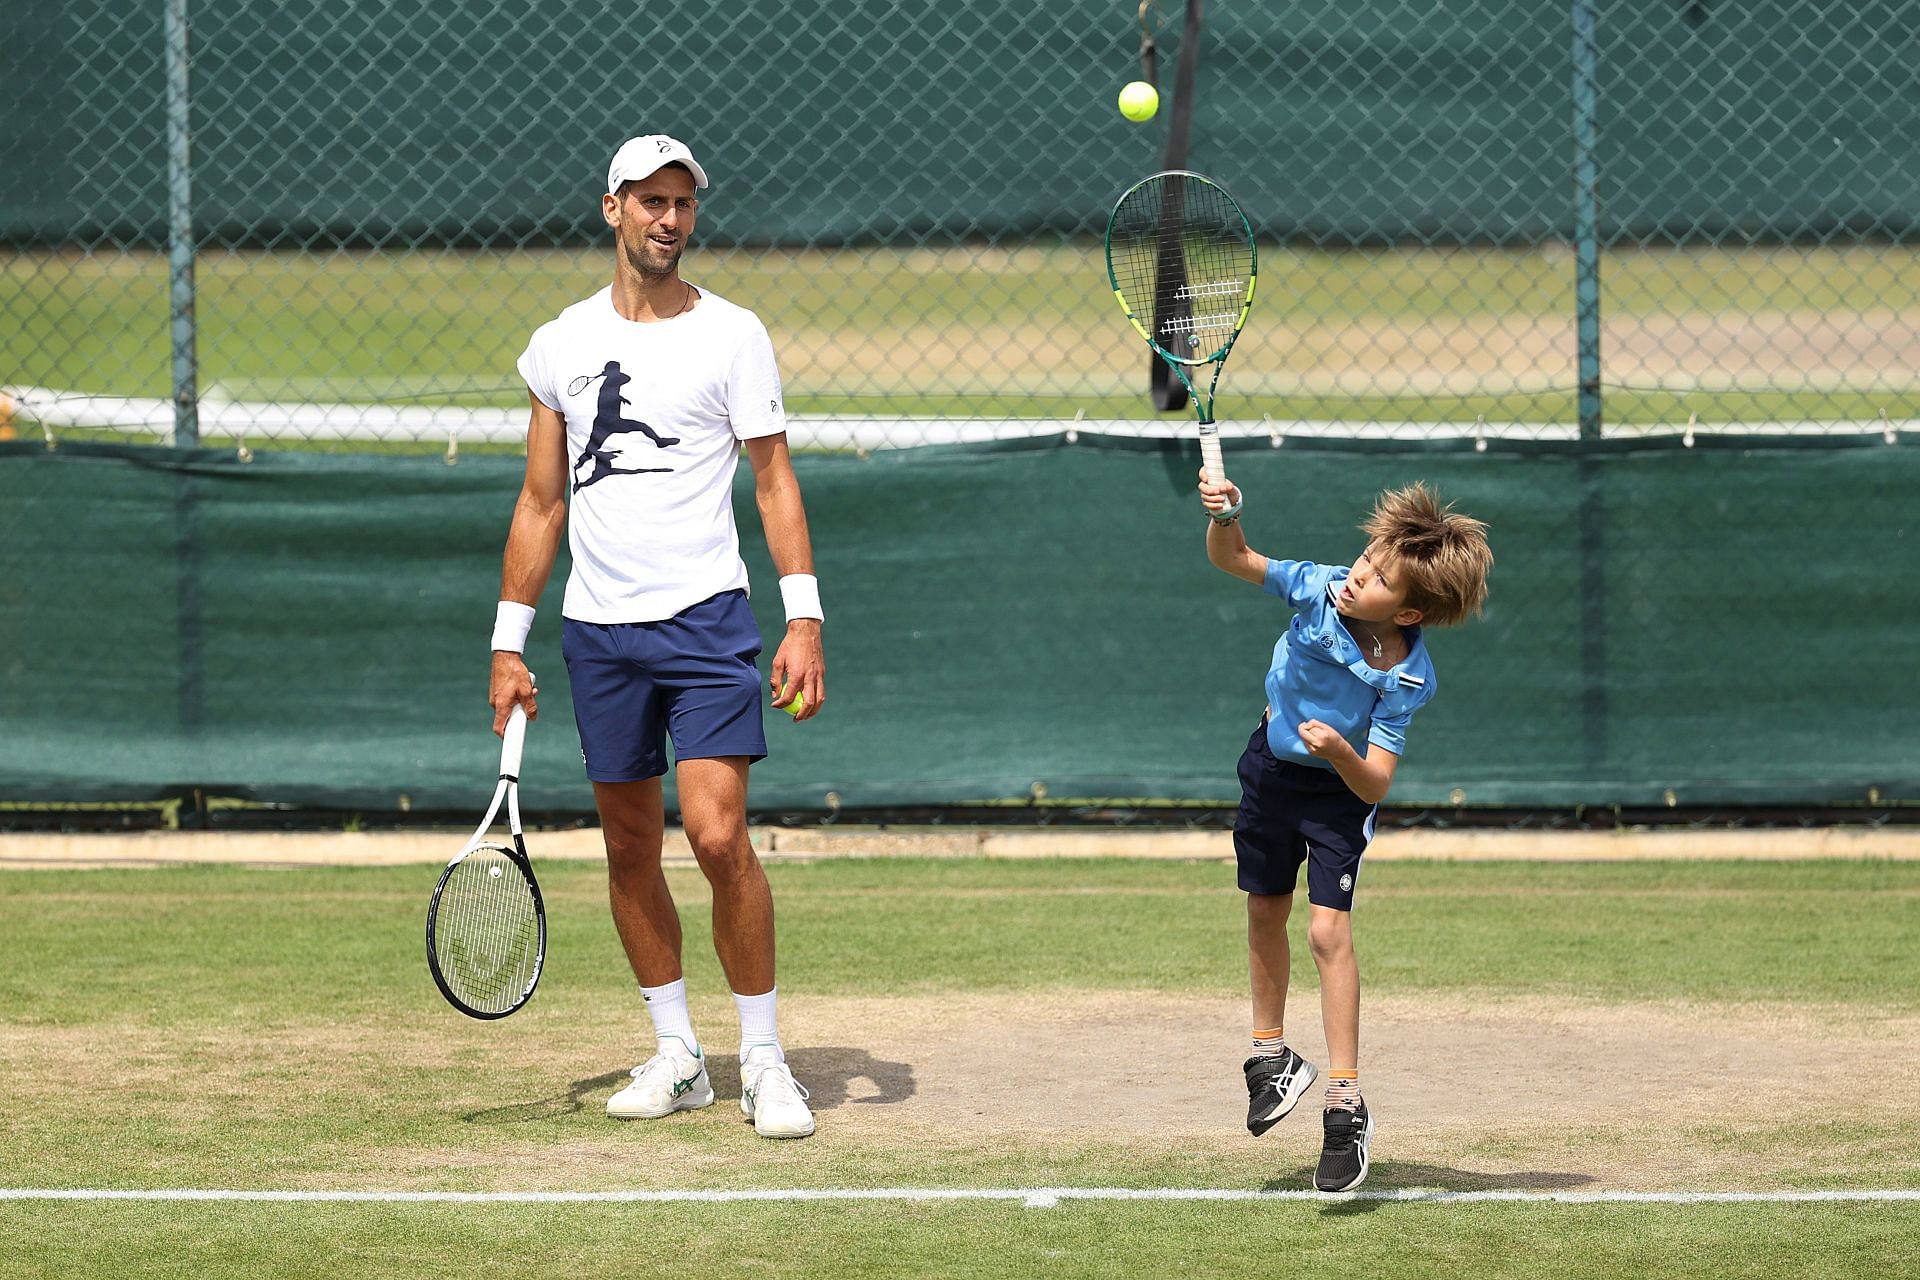 Novak Djokovic (left) looks on as son Stefan (right) serves in the practice courts of Wimbledon last July.